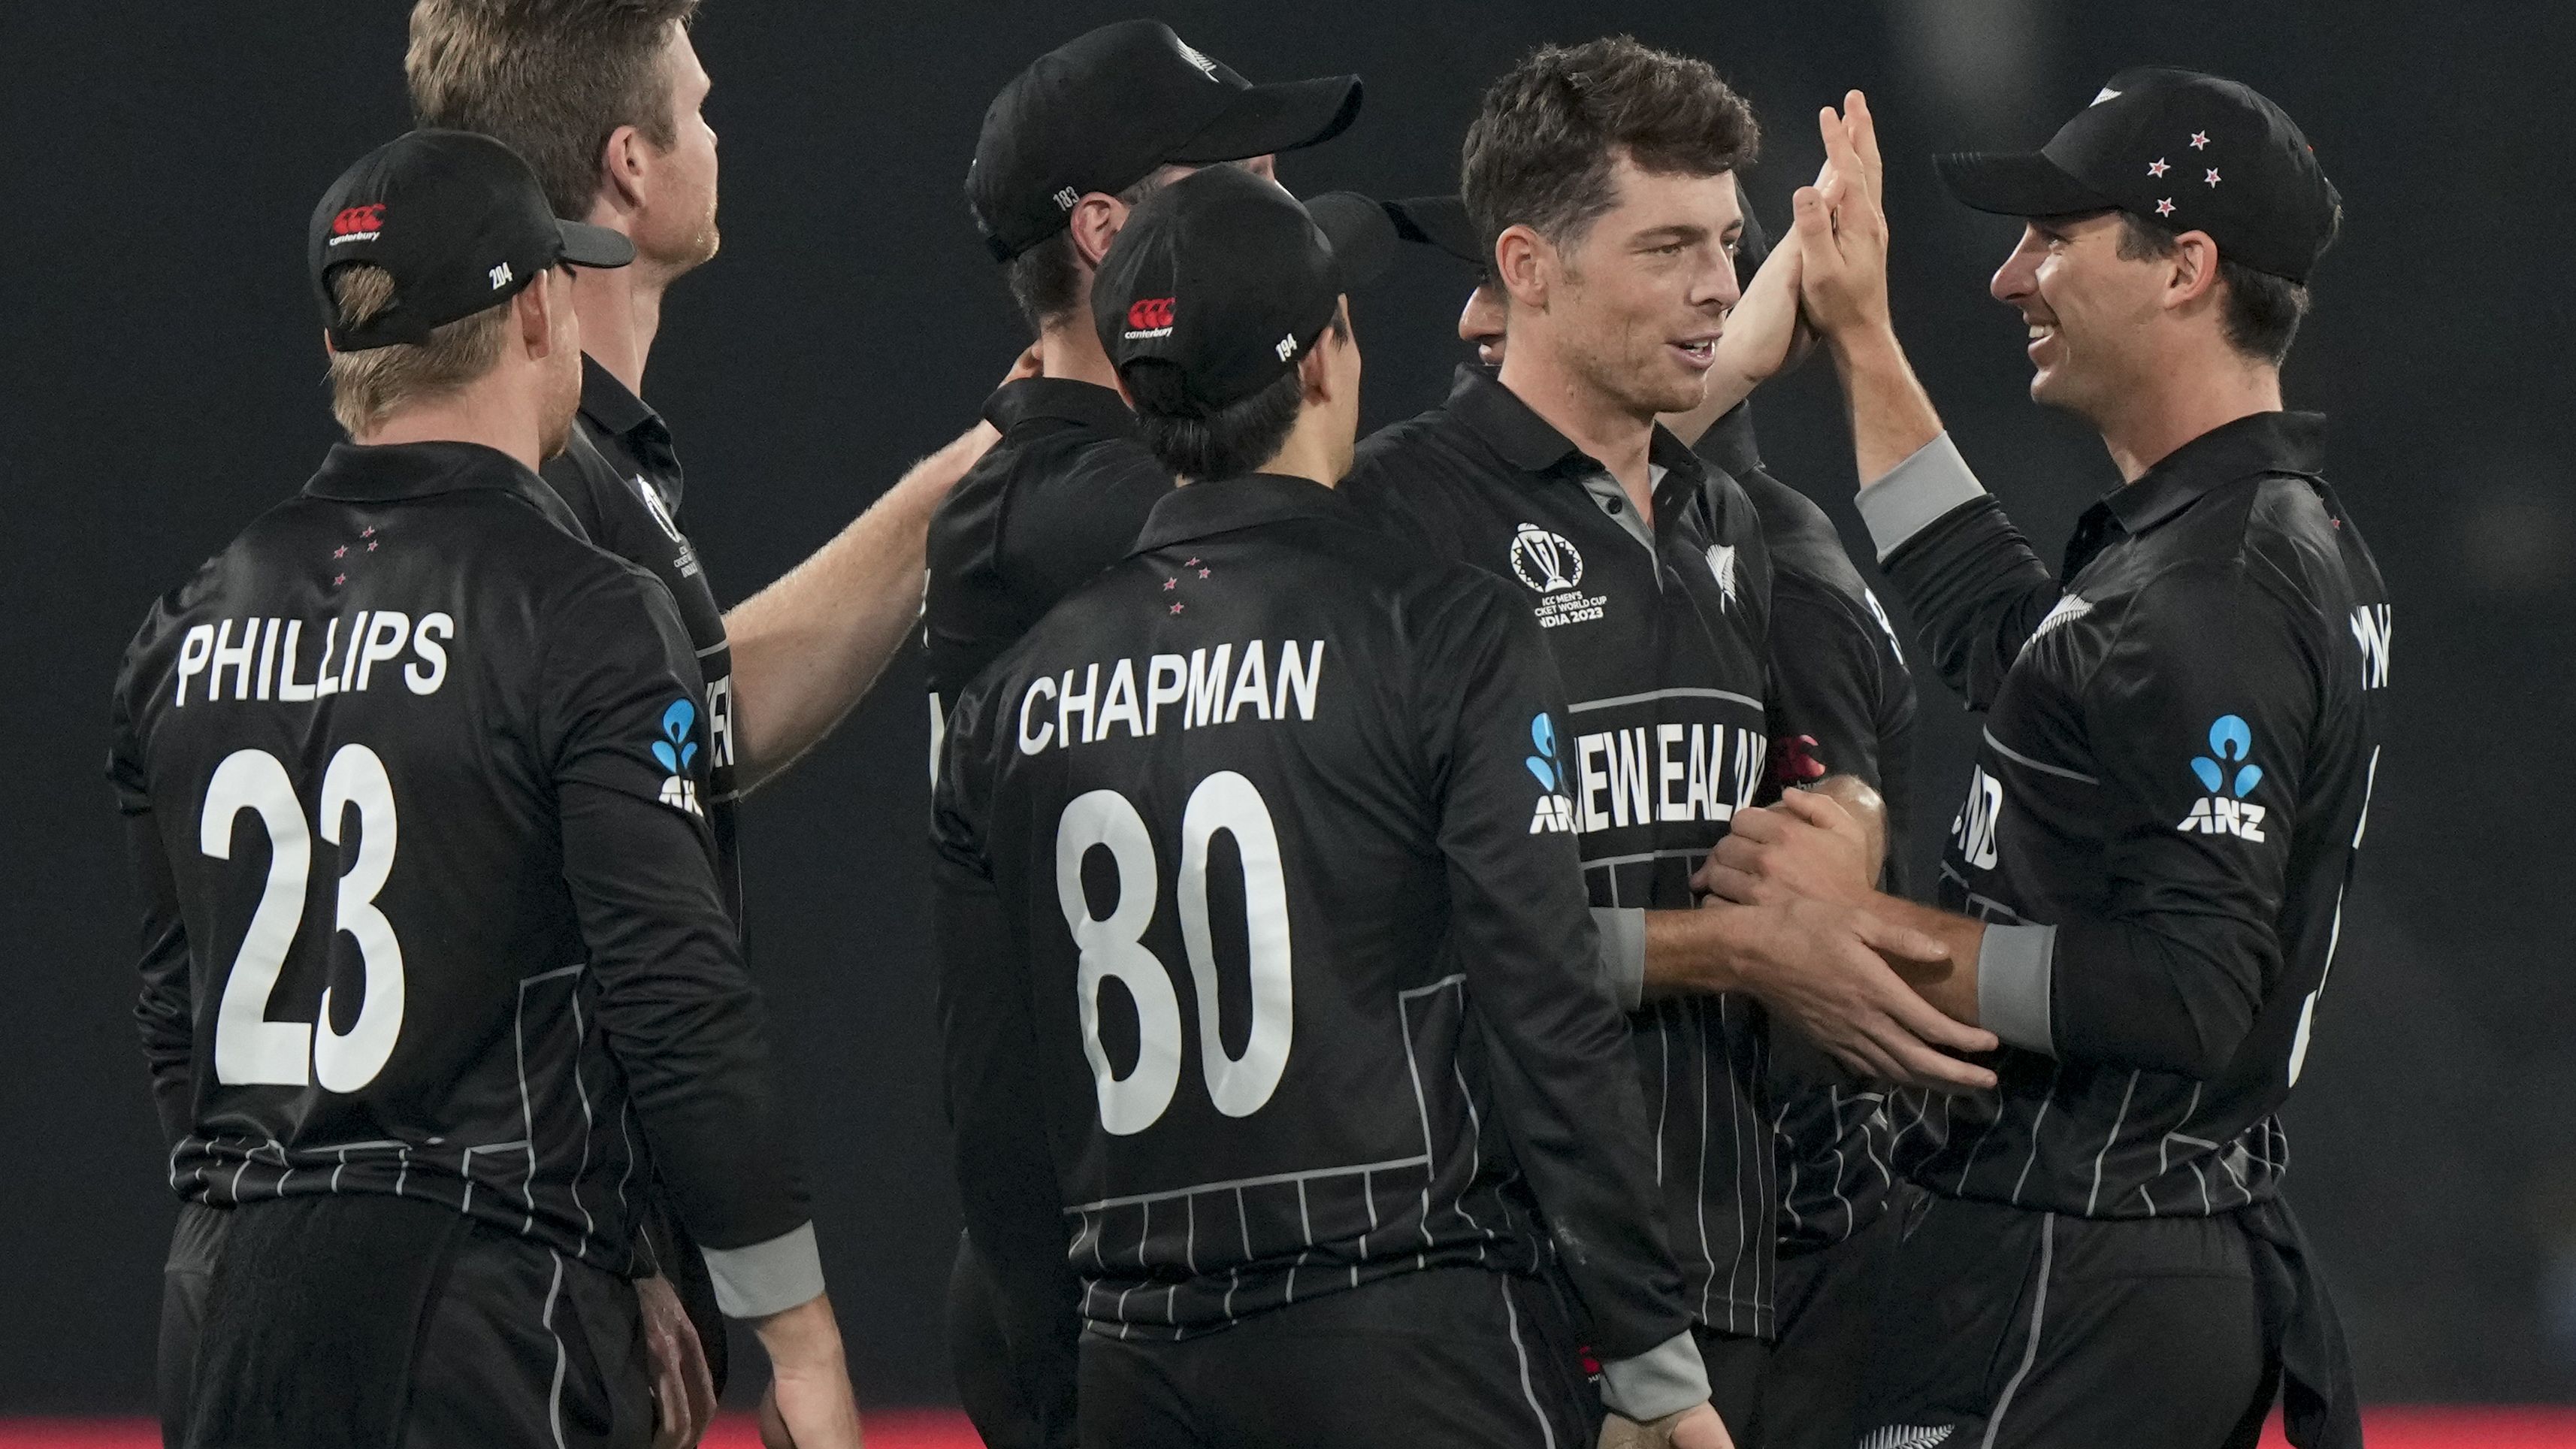 New Zealand claims another emphatic Cricket World Cup win by belting beating Netherlands